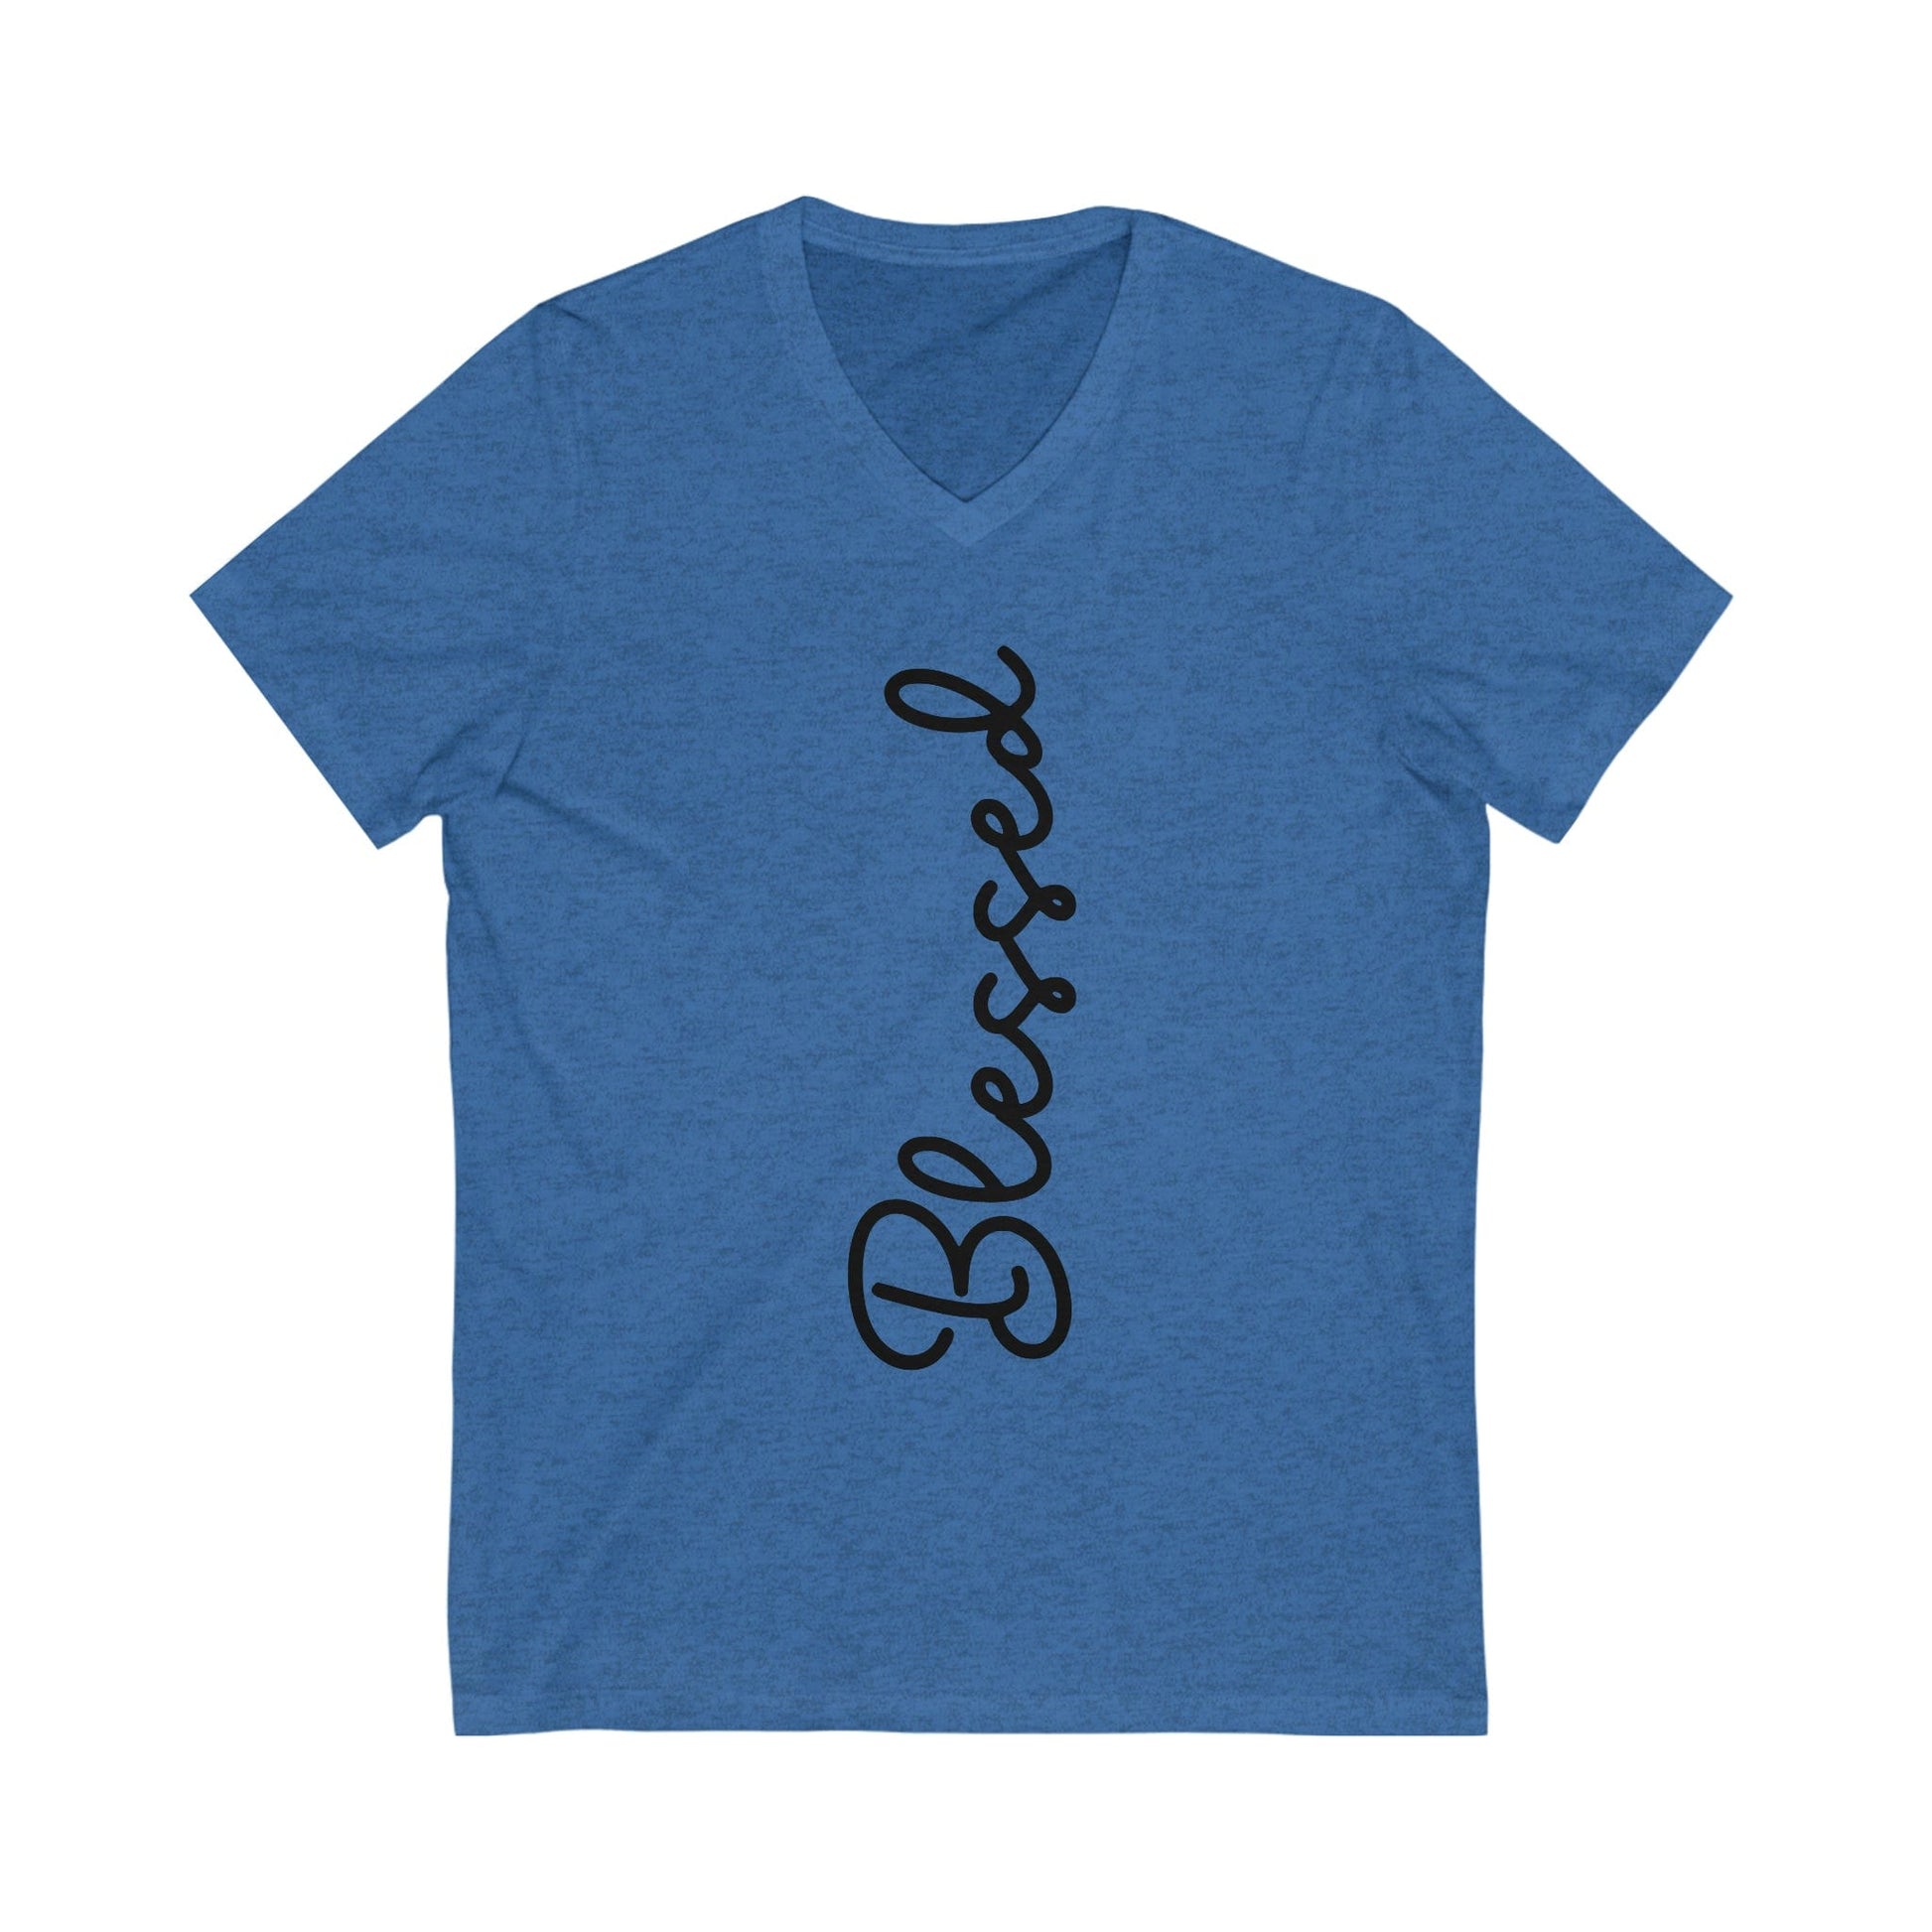 Blessed Tee, Christian Apparel, Faith Apparel, Blessed by God T-Shirt